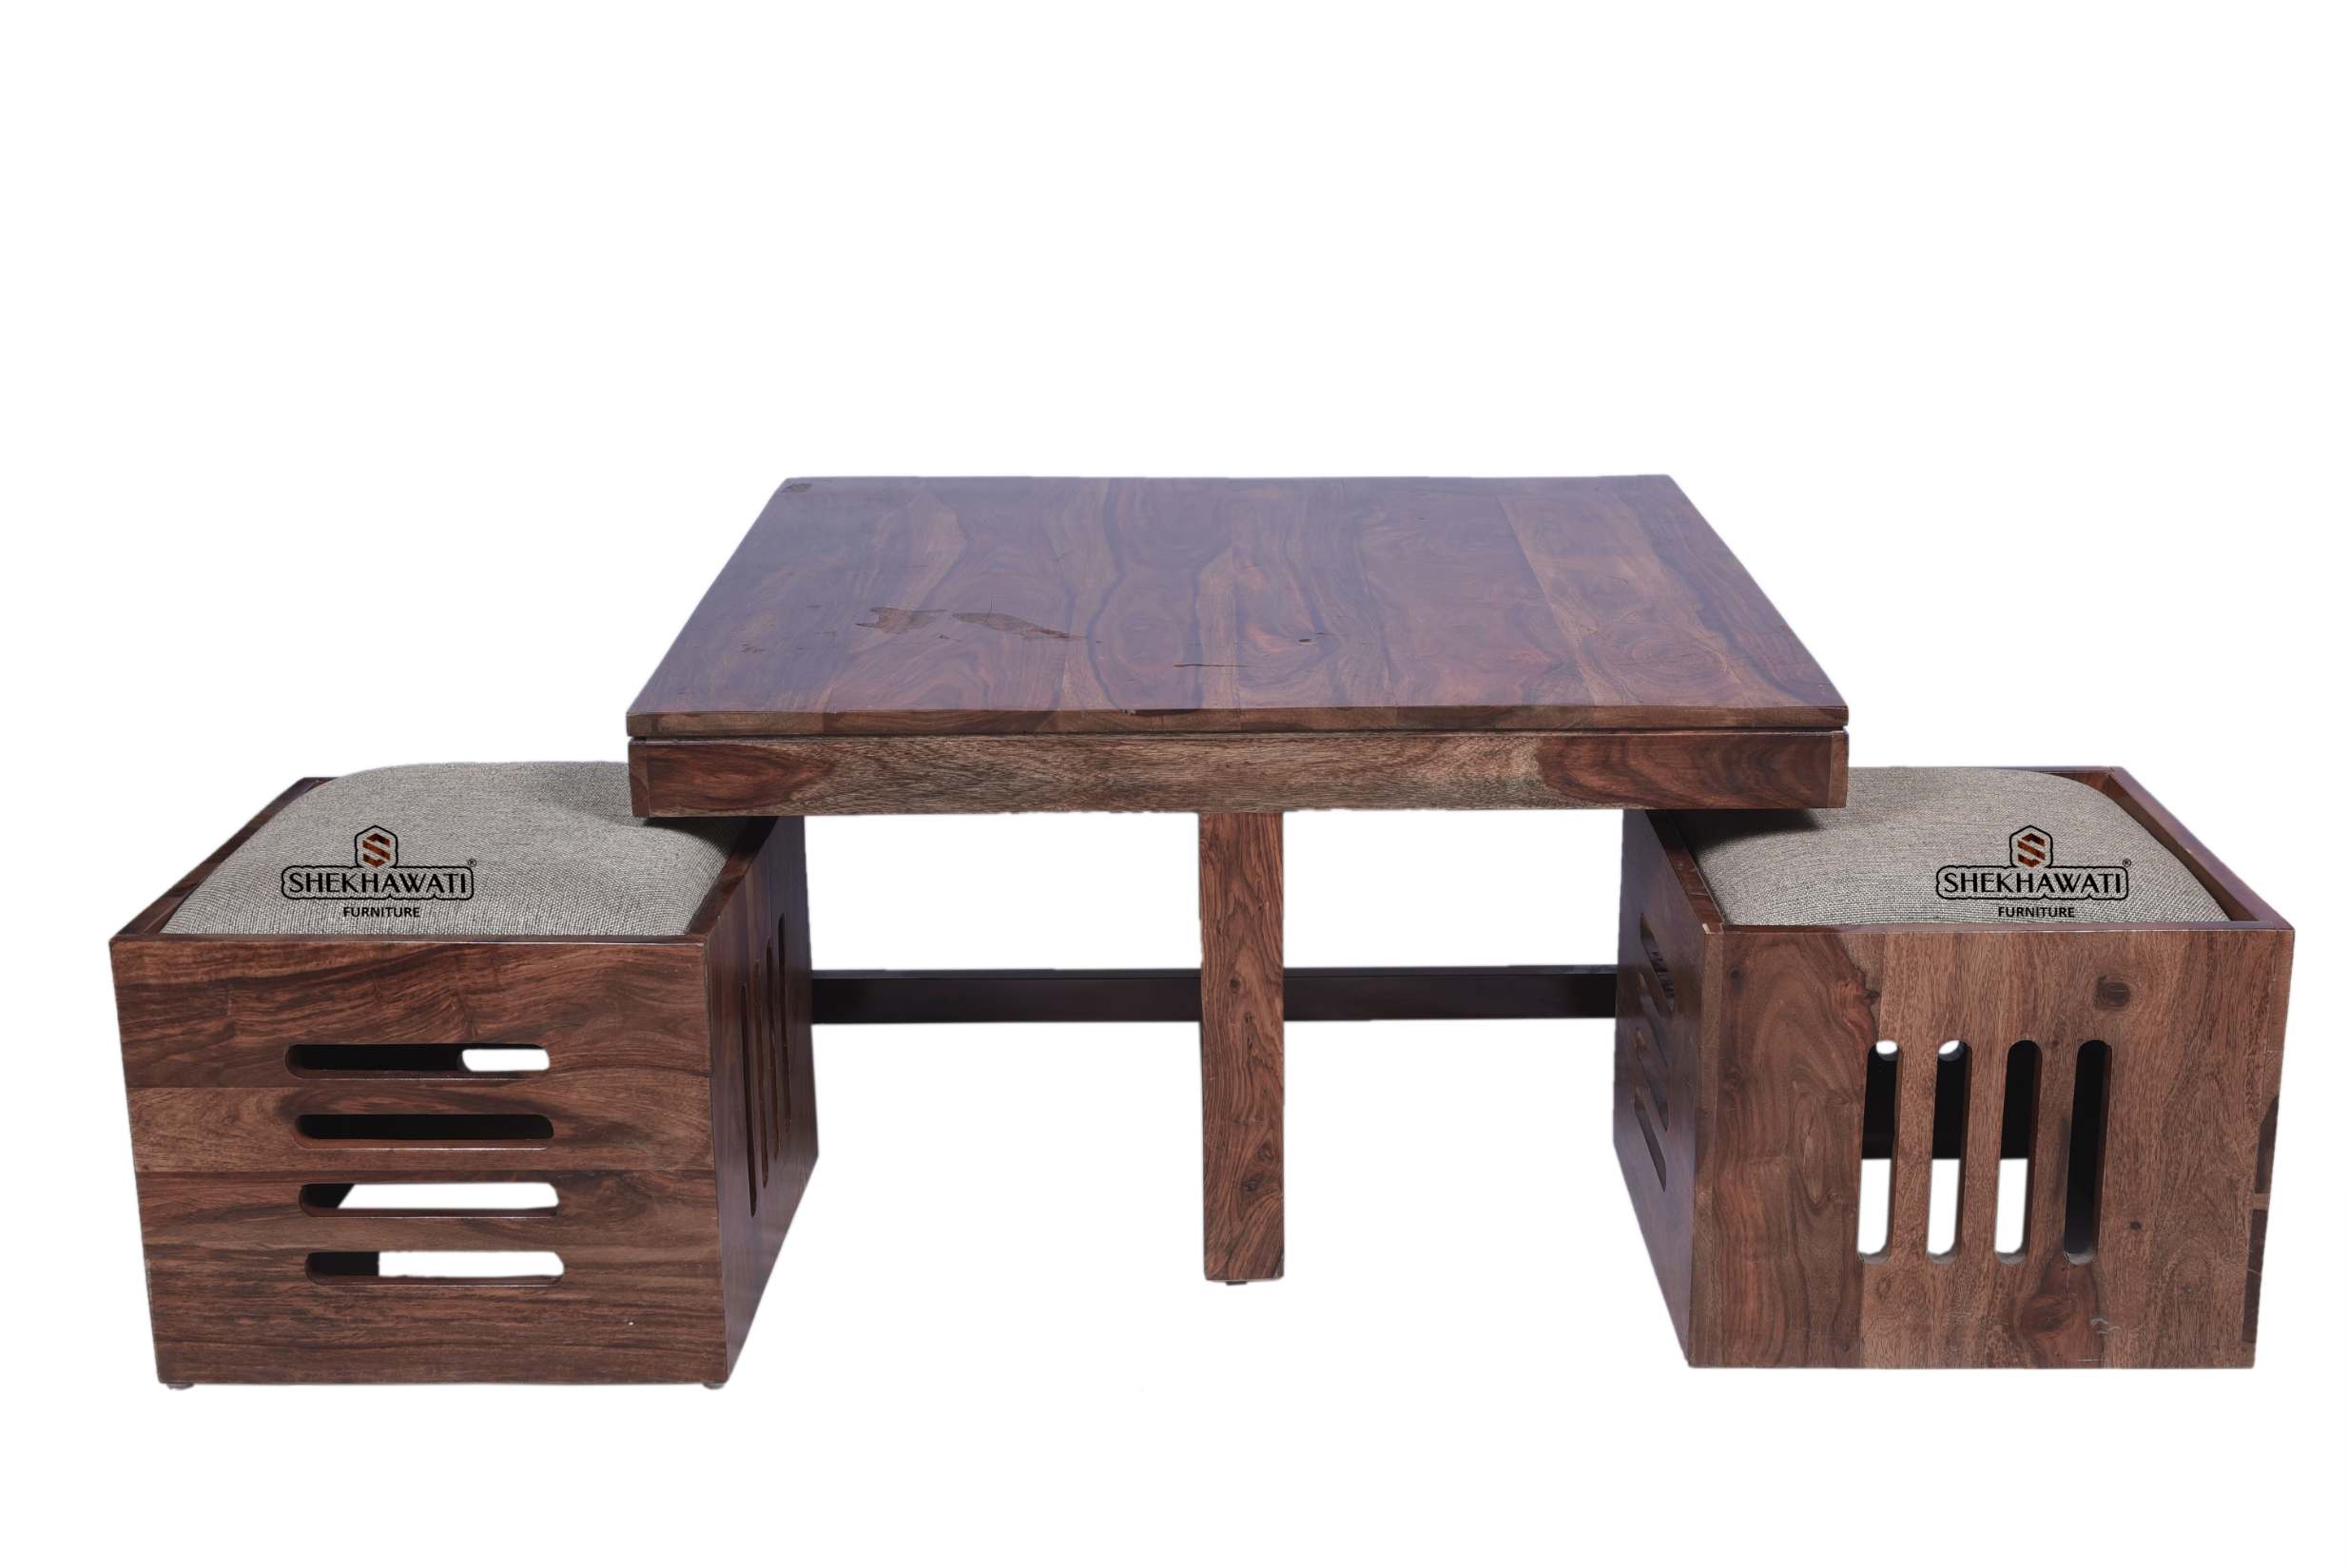 CAPE COFFEE TABLE WITH STOOLS